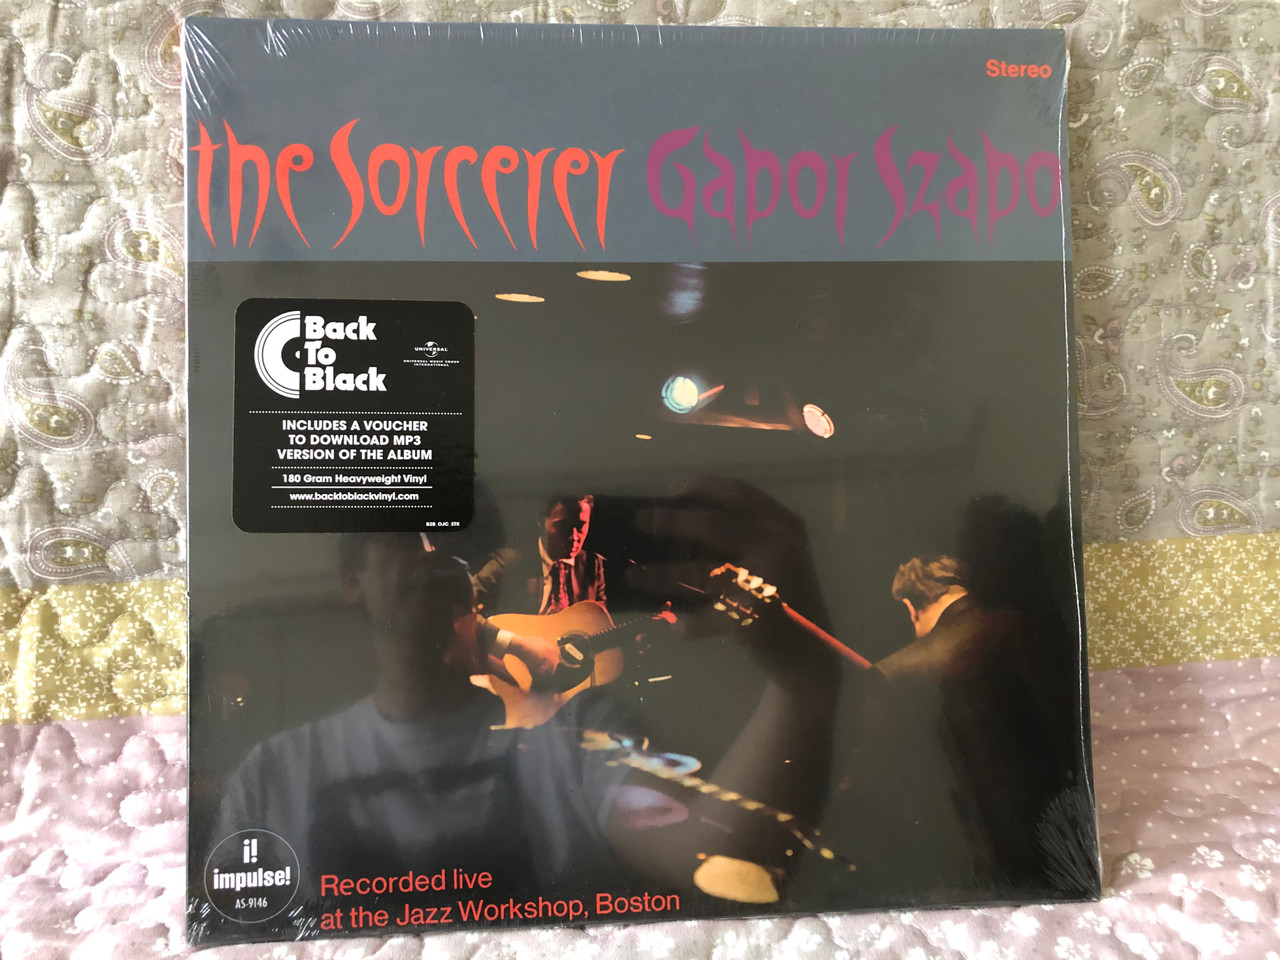 Gabor Szabo – The Sorcerer / Recorded live at the Jazz Workshop, Boston /  Back To Black / Includes A Voucher To Download Mp3 Version Of The Album /  180 Gram Heavyweight Vinyl / Impulse! LP 2015 Stereo / 06007 53630440 -  bibleinmylanguage